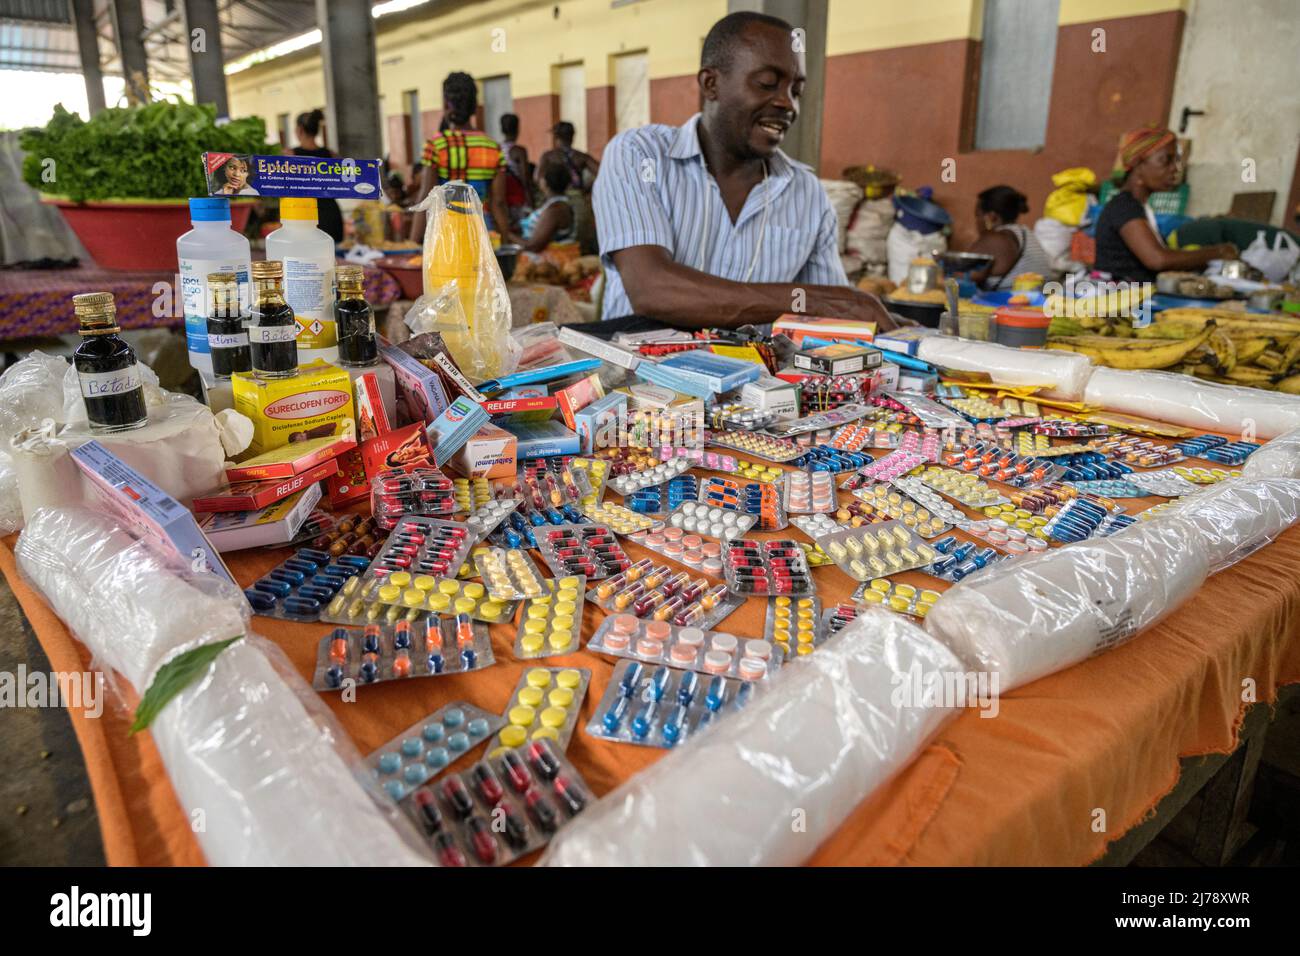 Man selling medicines at a stall in the Bobo Forro market. Stock Photo